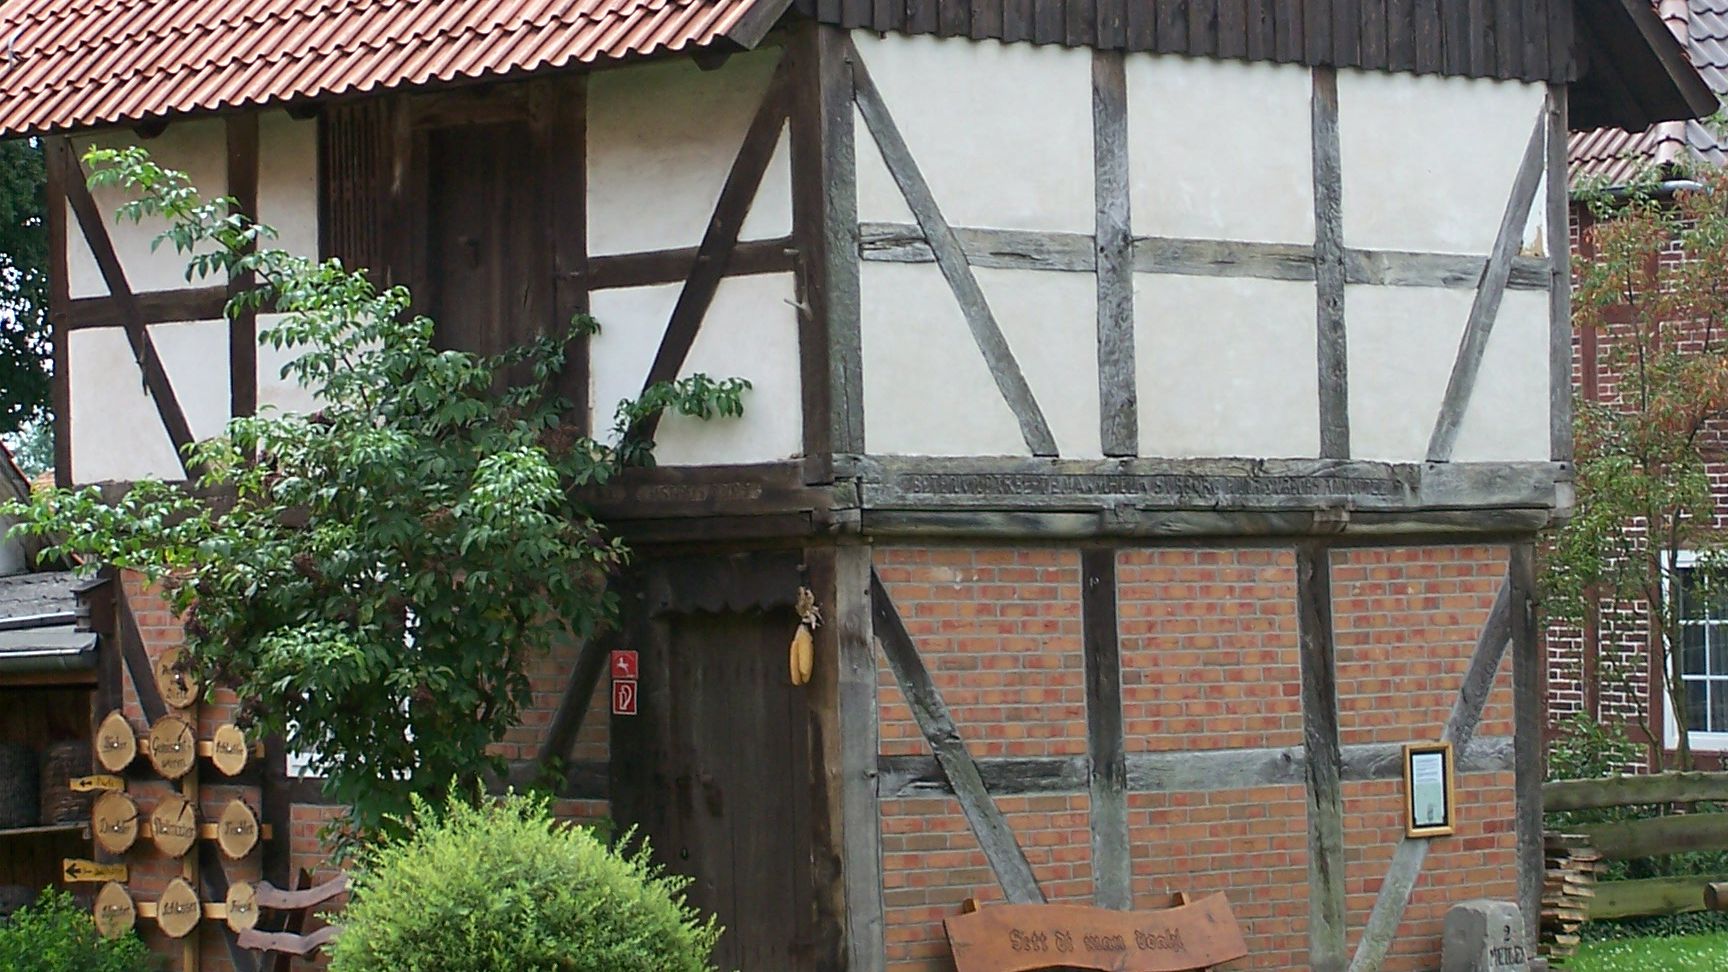 Historic storehouse in the Langlingen village museum